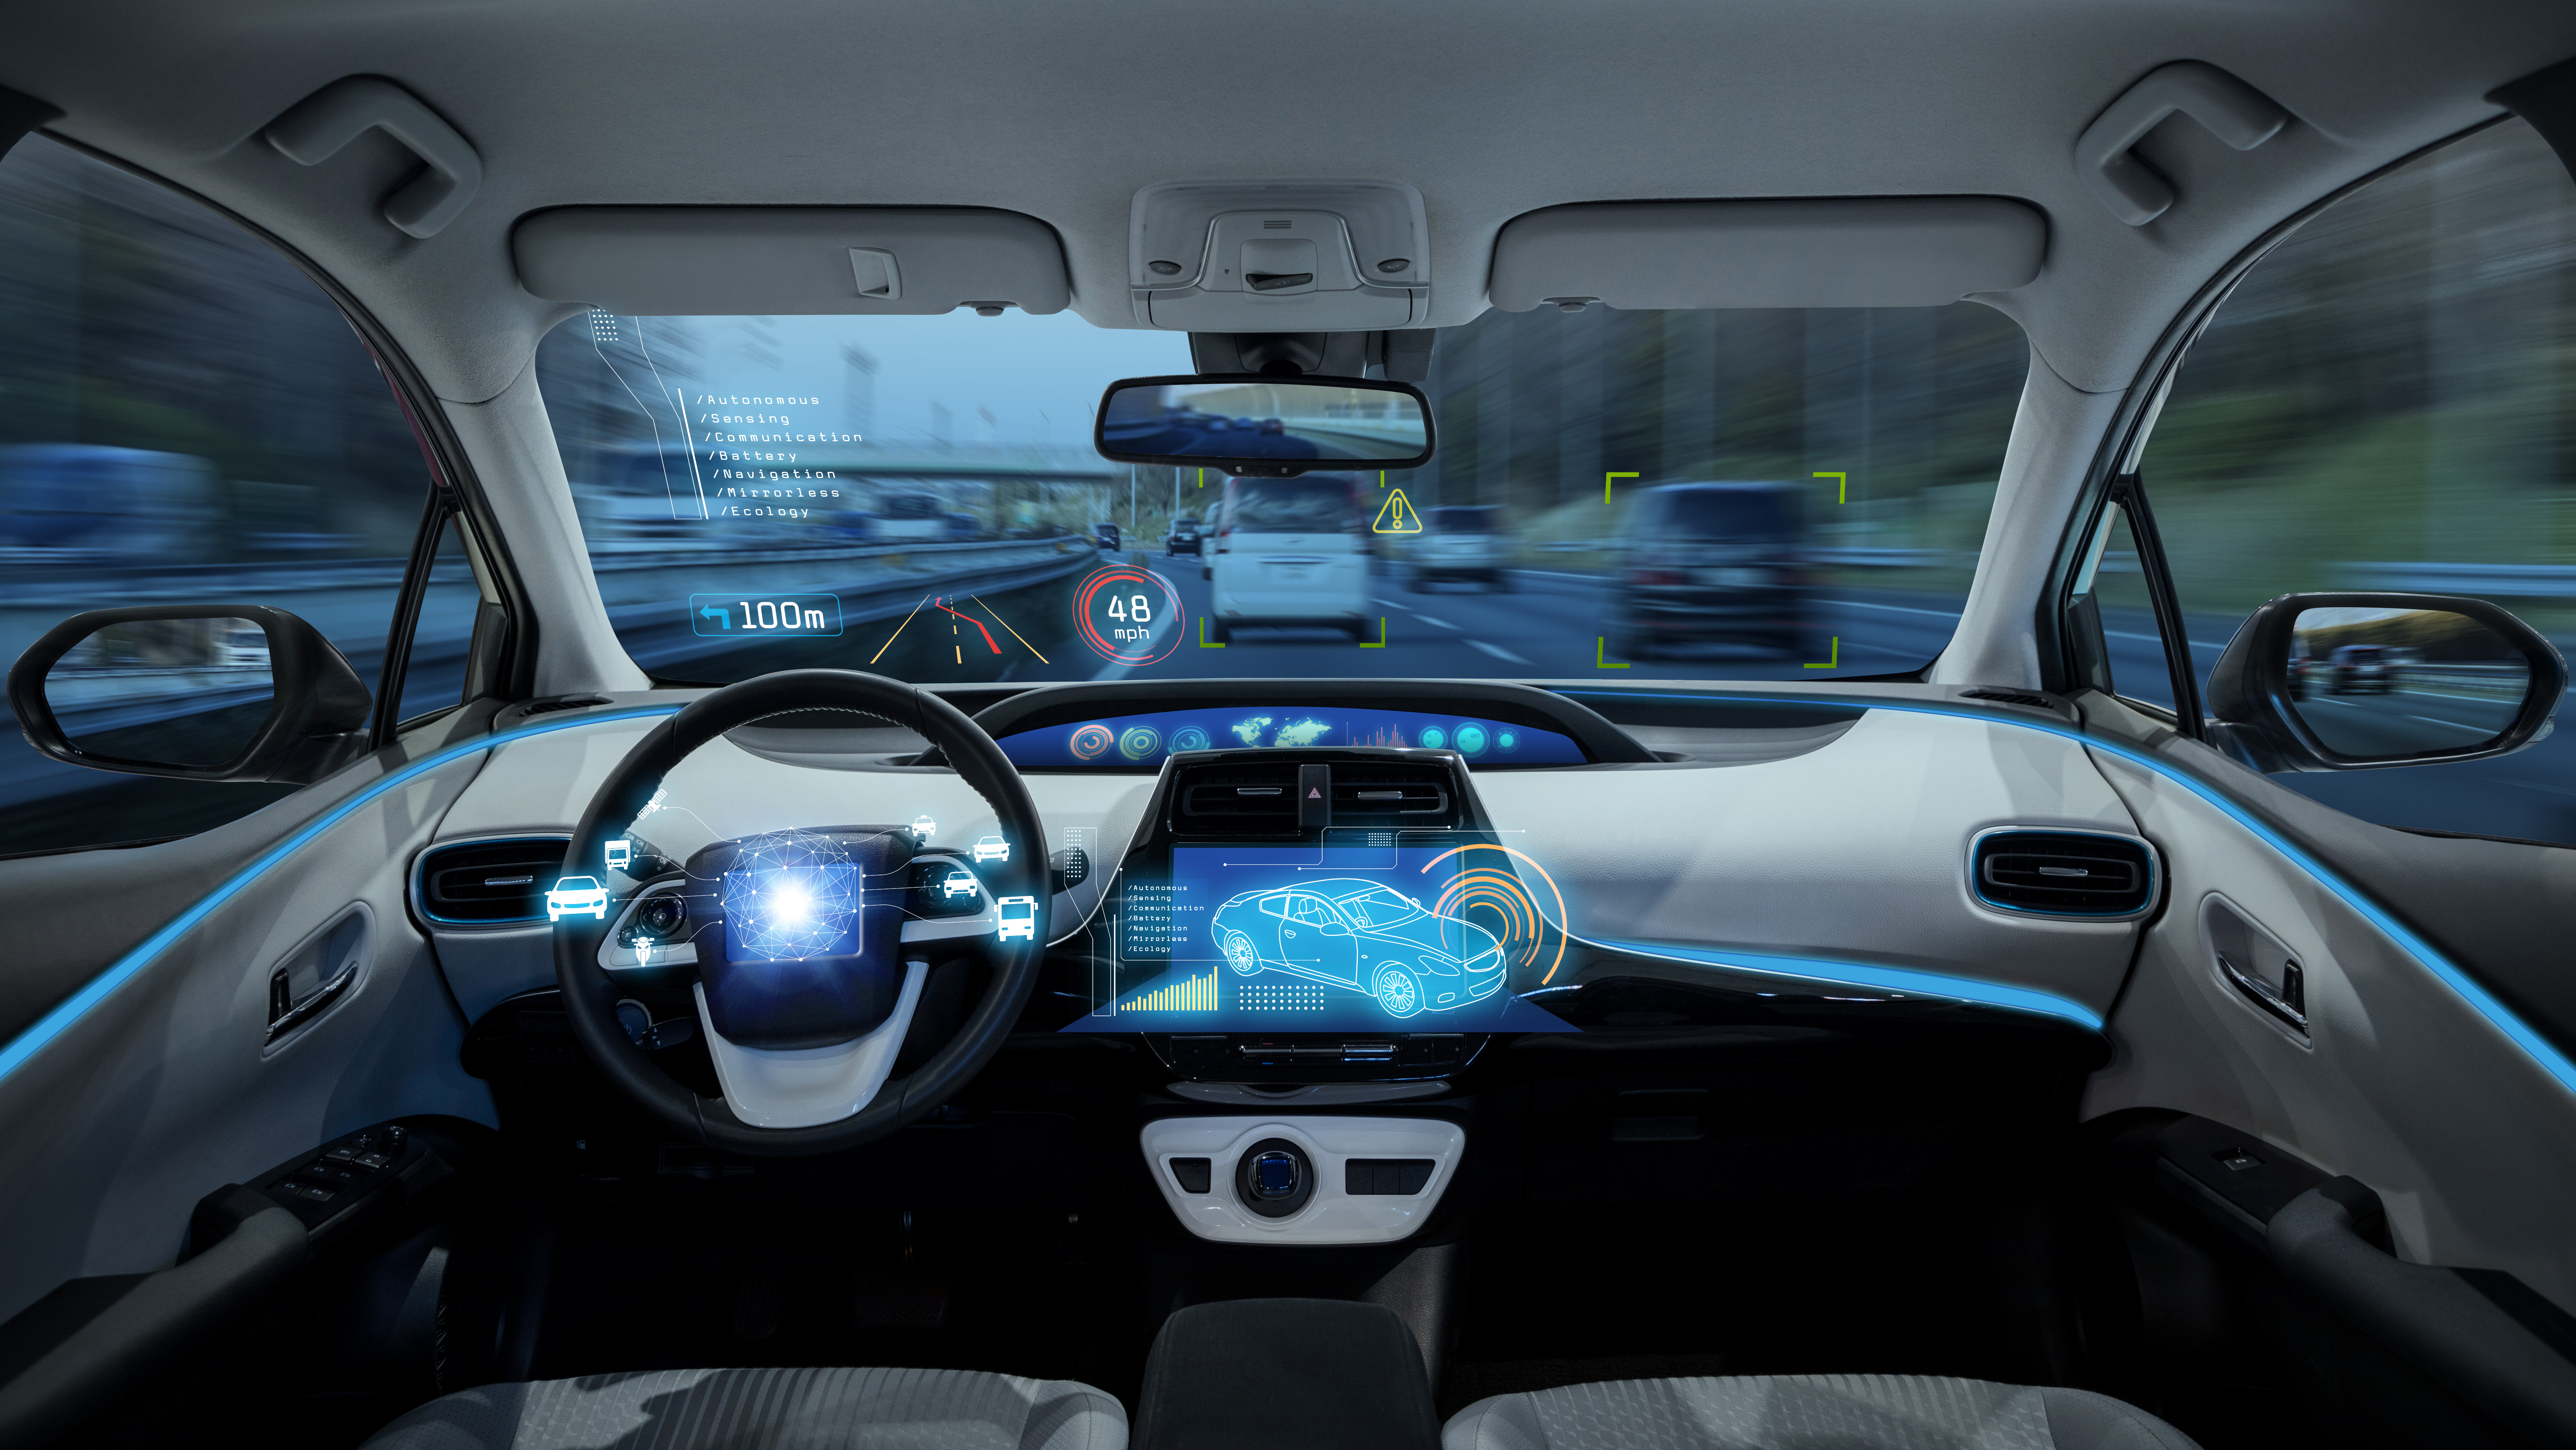 Designing Cyber-Safe Connected Vehicle Architecture comments